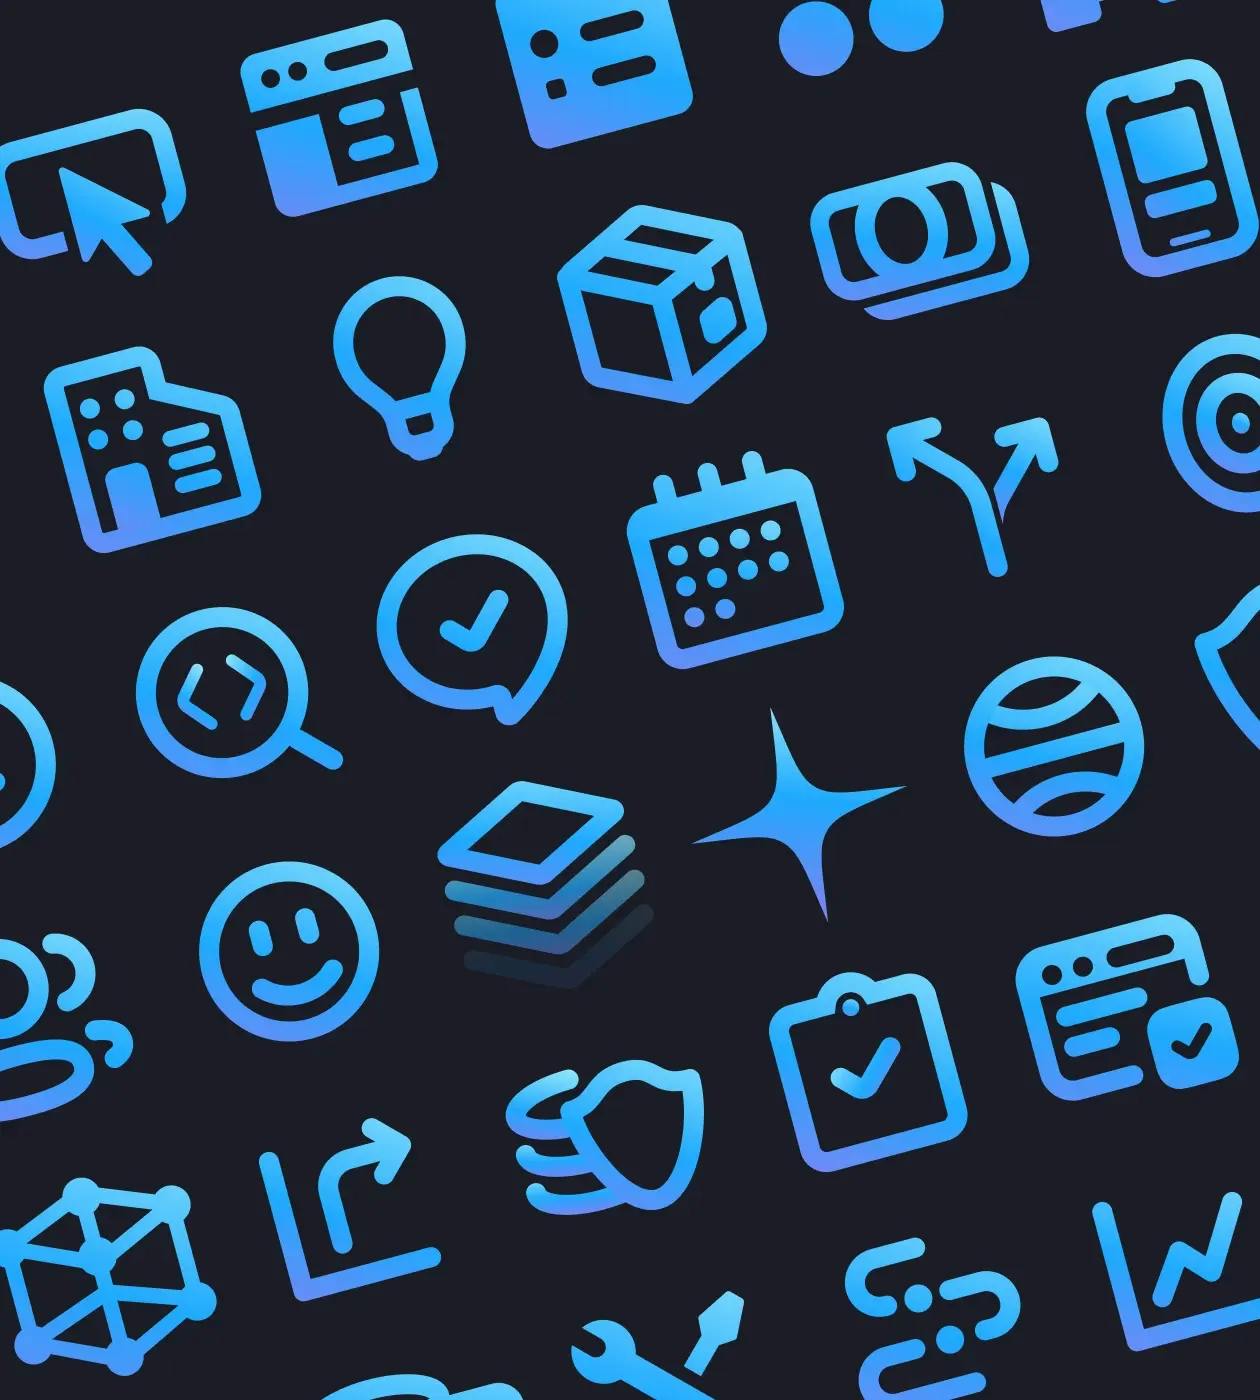 Custom icons for apps